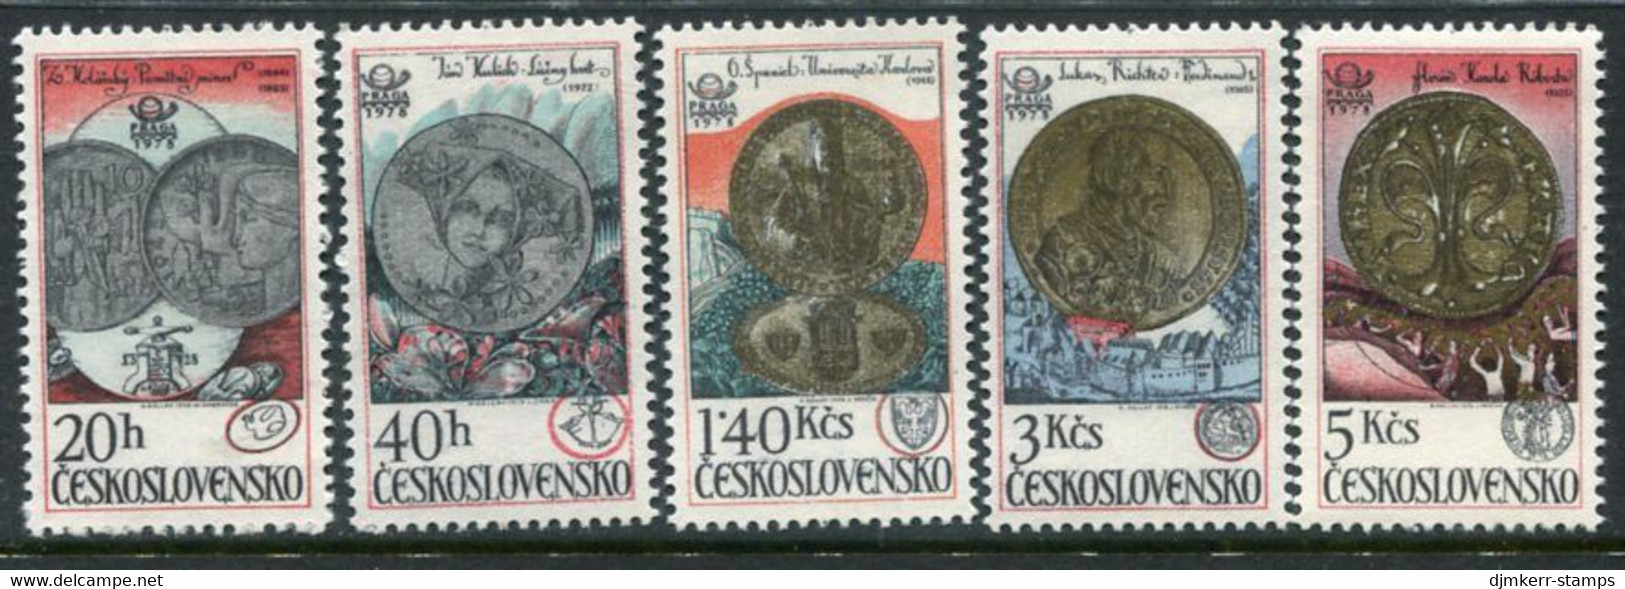 CZECHOSLOVAKIA 1978 Coins From Kremnica Mint MNH / **.   Michel 2427-31 - Unused Stamps